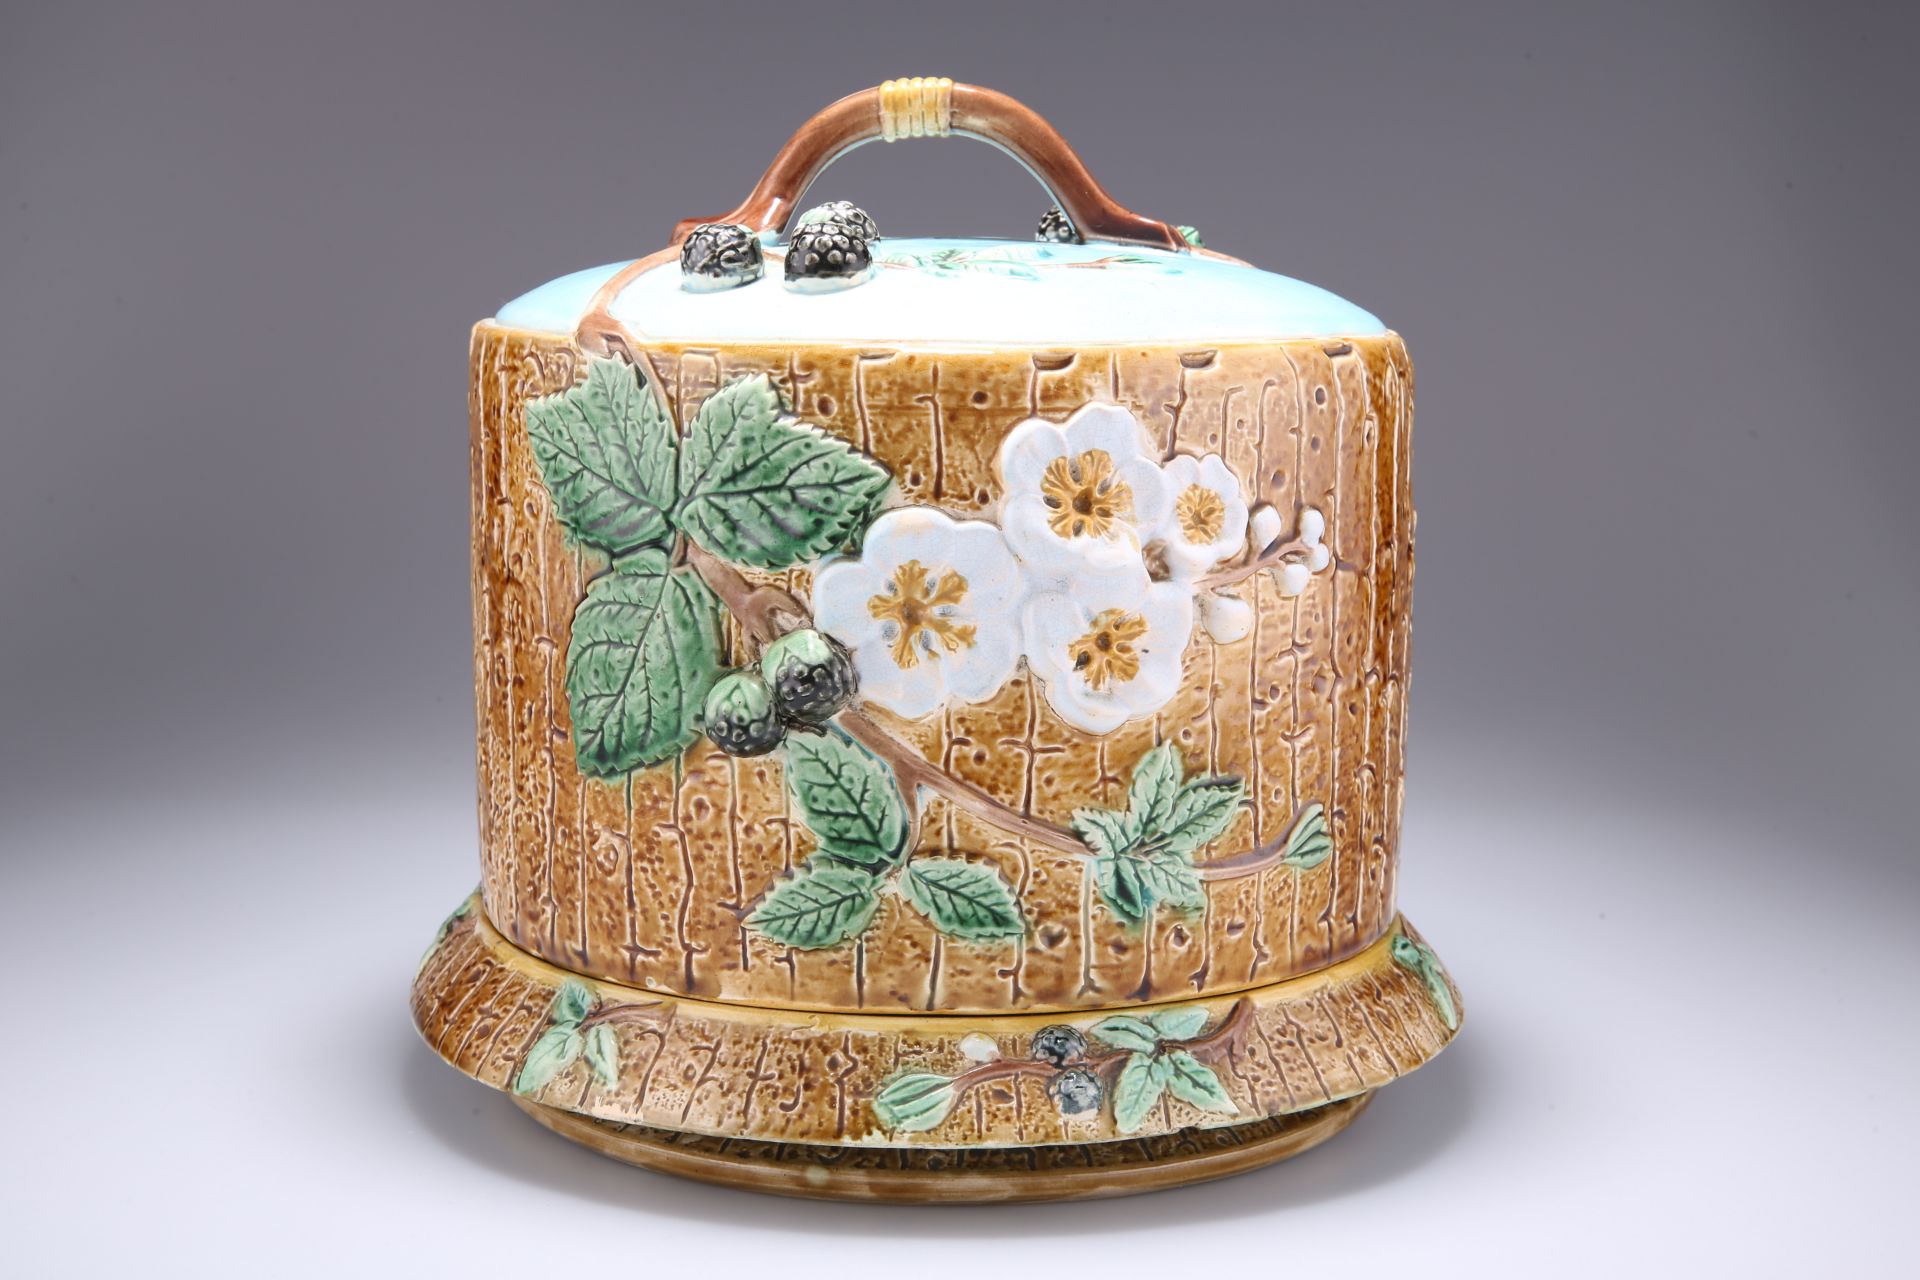 JOSEPH HOLDCROFT, A MAJOLICA CHEESE DOME AND UNDERPLATE, CIRCA 1880